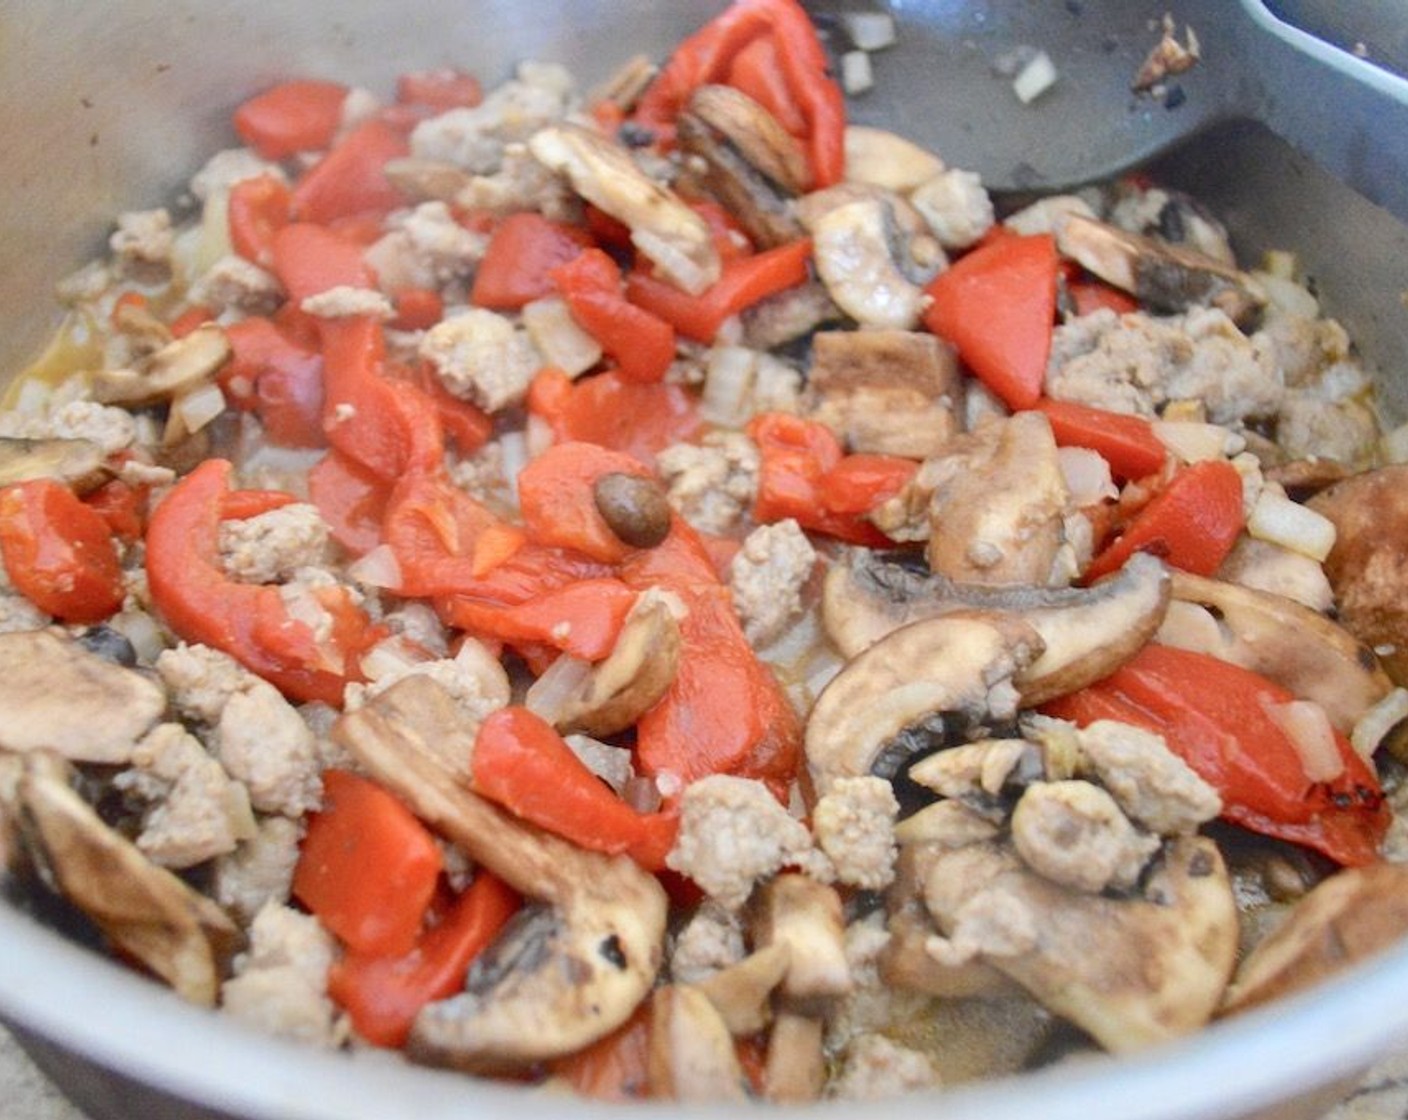 step 5 Once sausage is mostly cooked, add the Jarred Roasted Red Peppers (1 jar), Cremini Mushrooms (2 1/4 cups), and Onion (1). Let them cook with the sausage until soft and fragrant, just a few minutes. Take the mixture off the heat and let it cool.